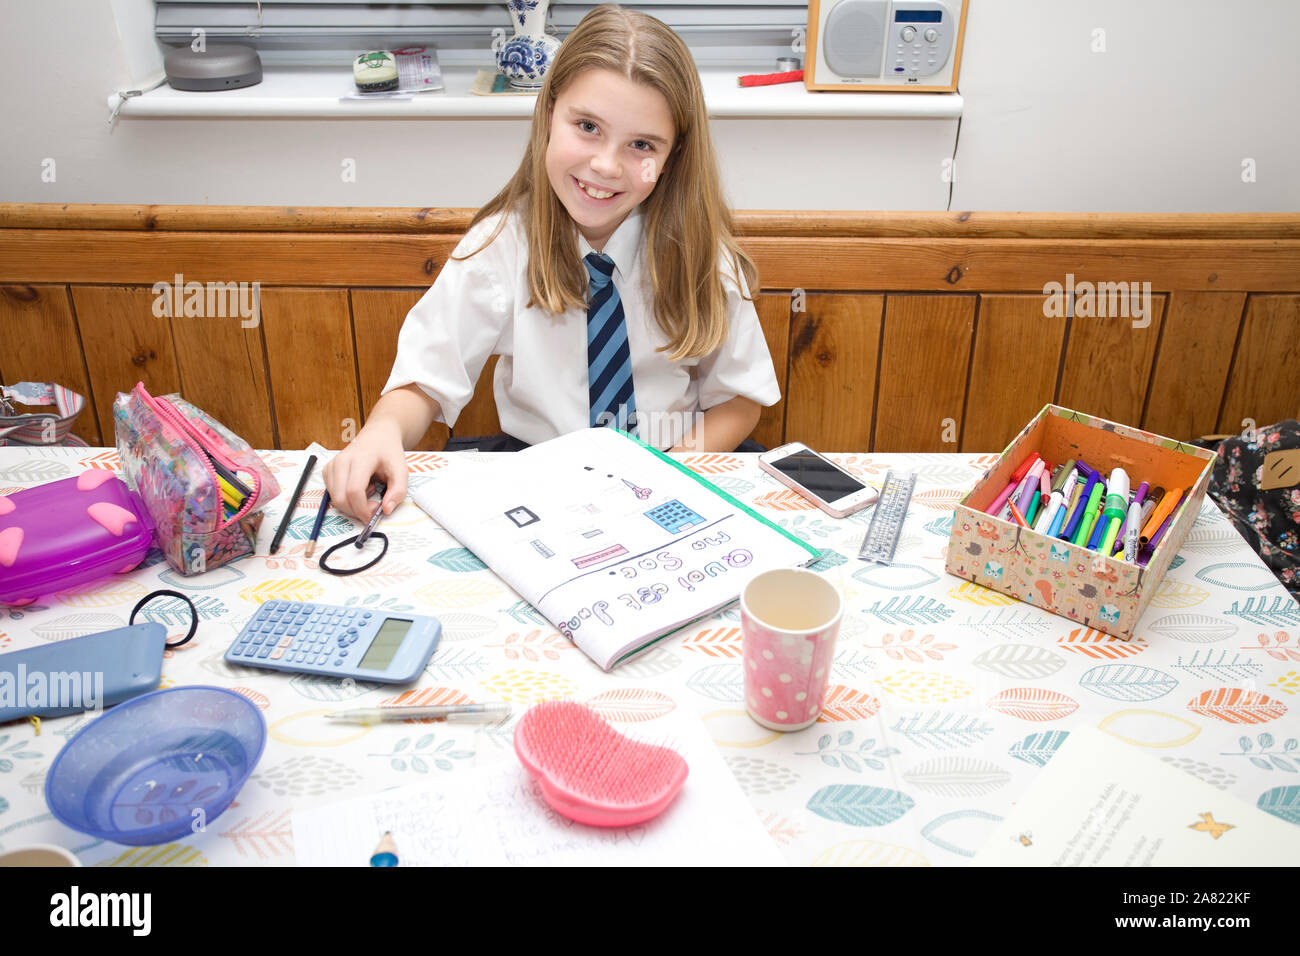 School girl doing french homework at kitchen table Stock Photo